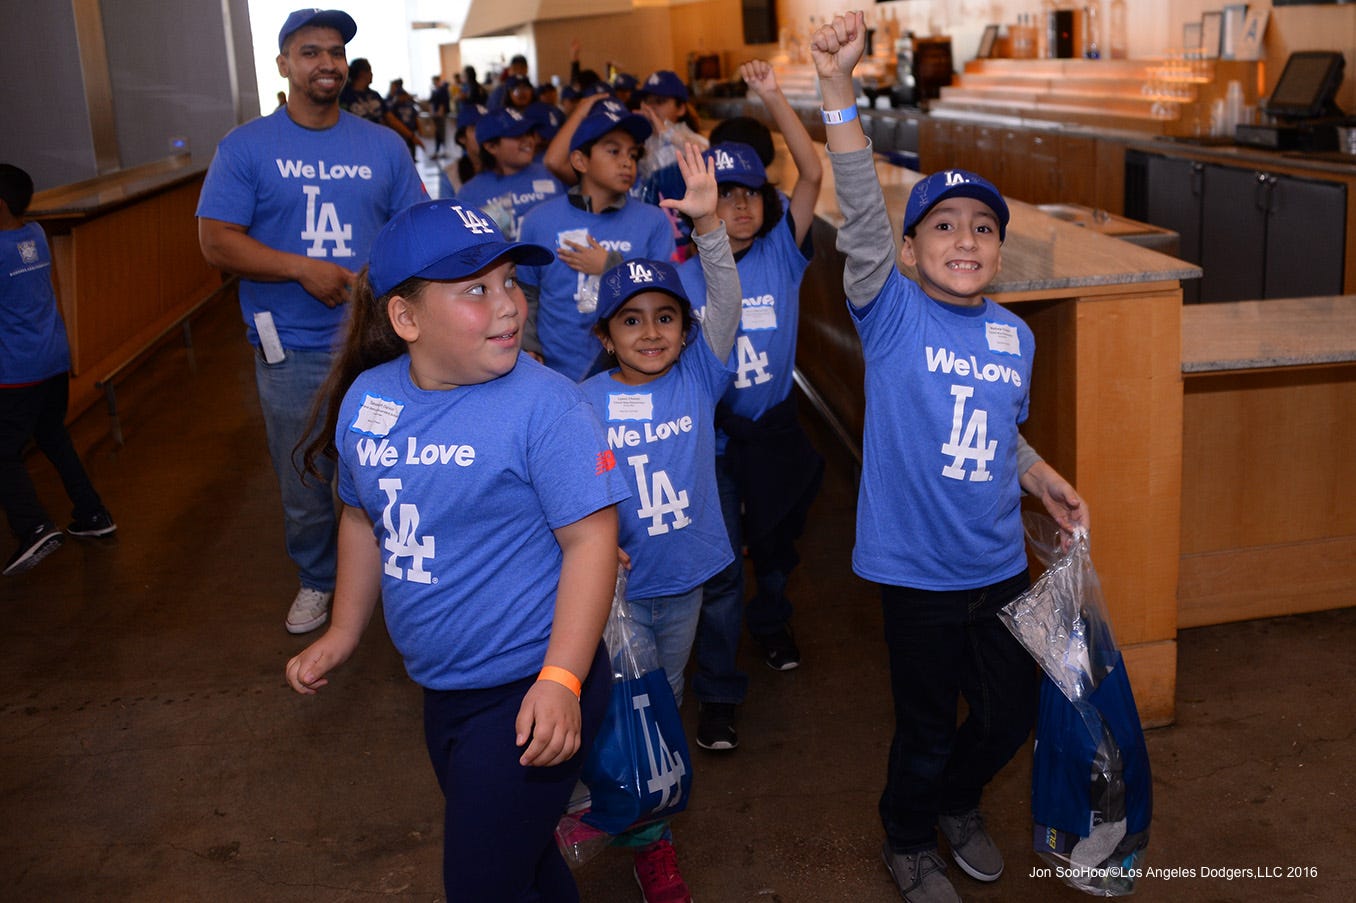 12/14/16-Something Fun-LA Dodgers Annual Children’s Holiday Party Photography by Jon ...1356 x 903